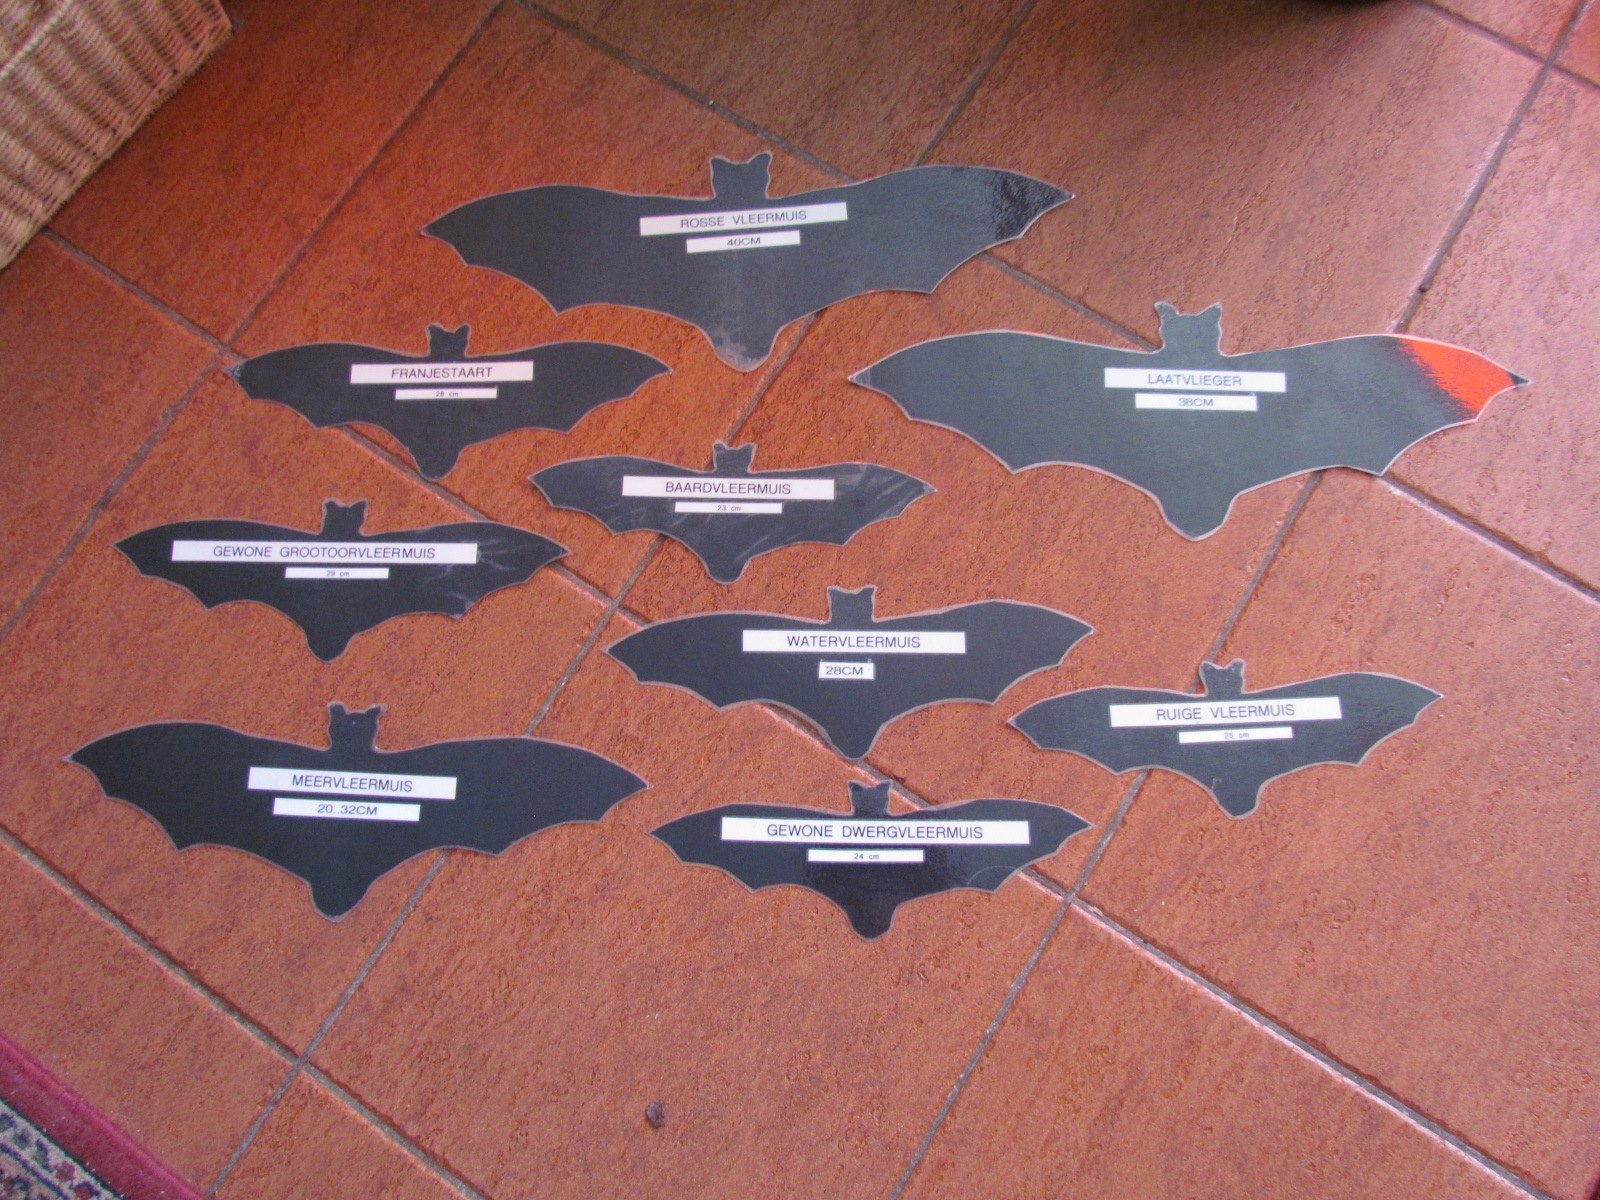 Bat silhouettes at 1:1 scale created by Hillie Waning Vos